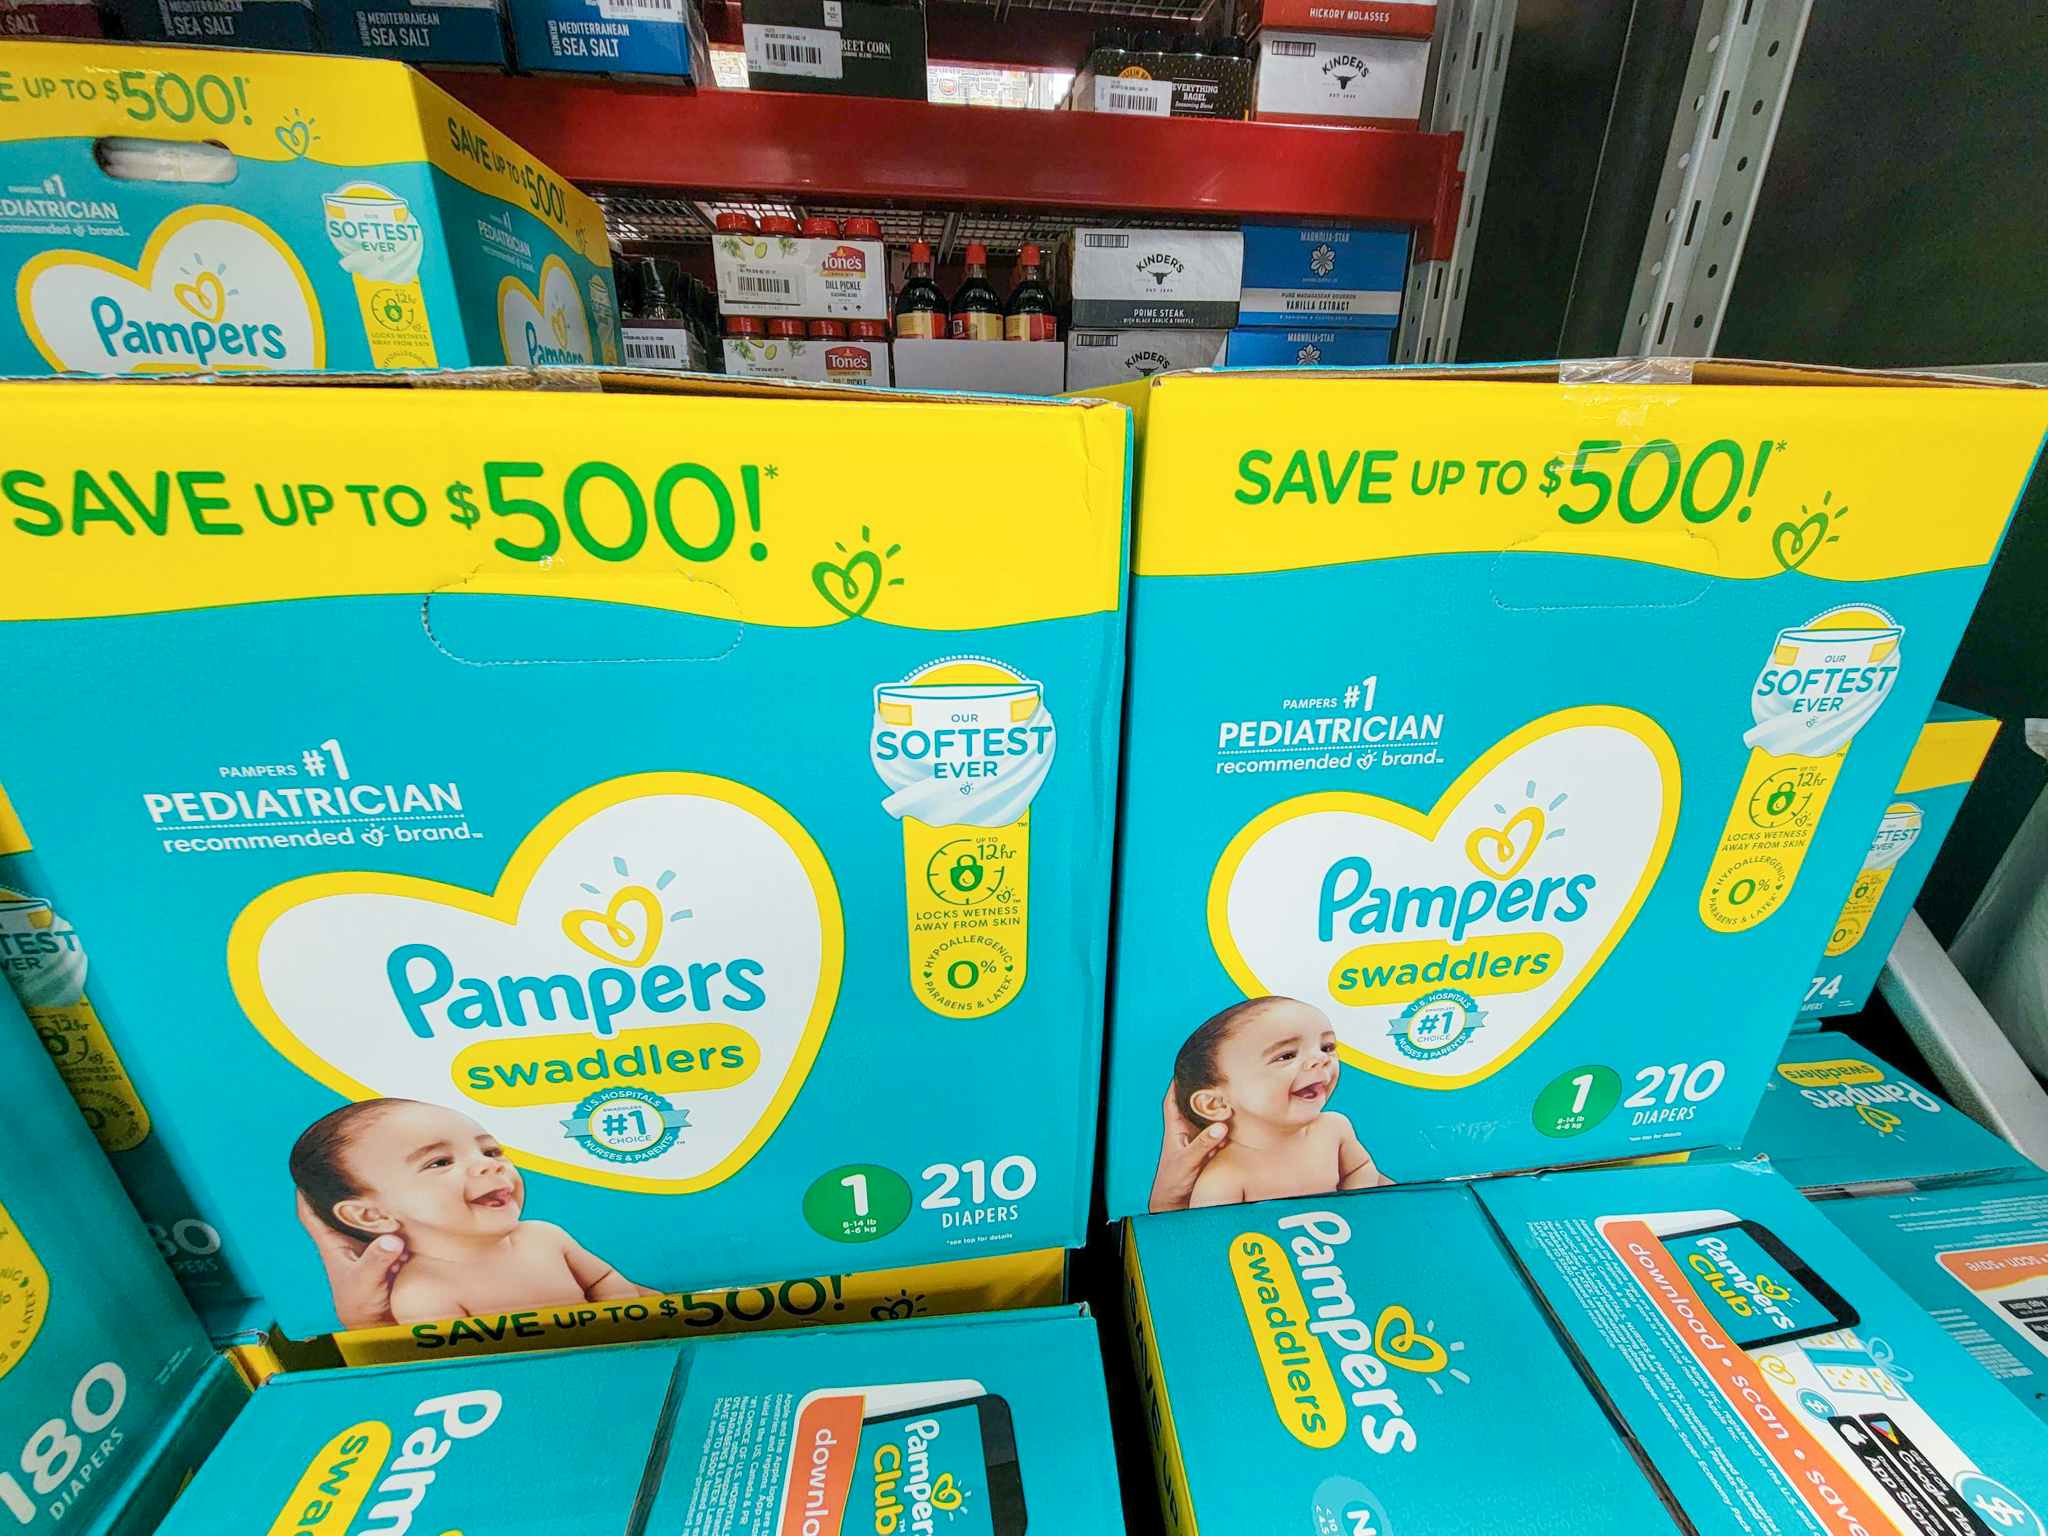 large boxes of pampers swaddlers